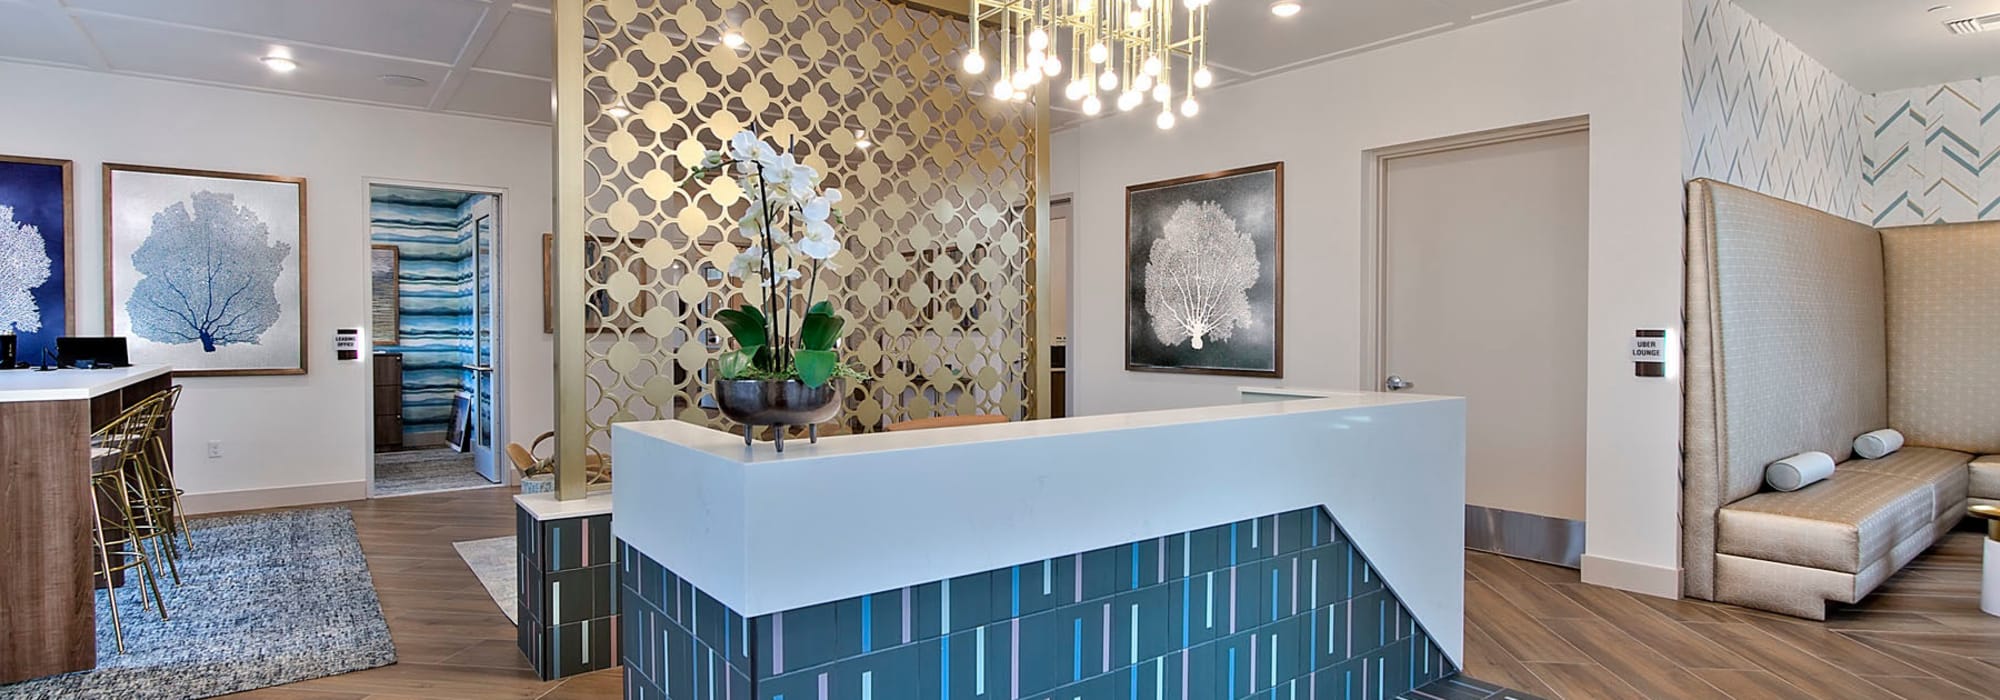 Luxurious decor in the lobby and reception area at Jade Apartments in Las Vegas, Nevada 